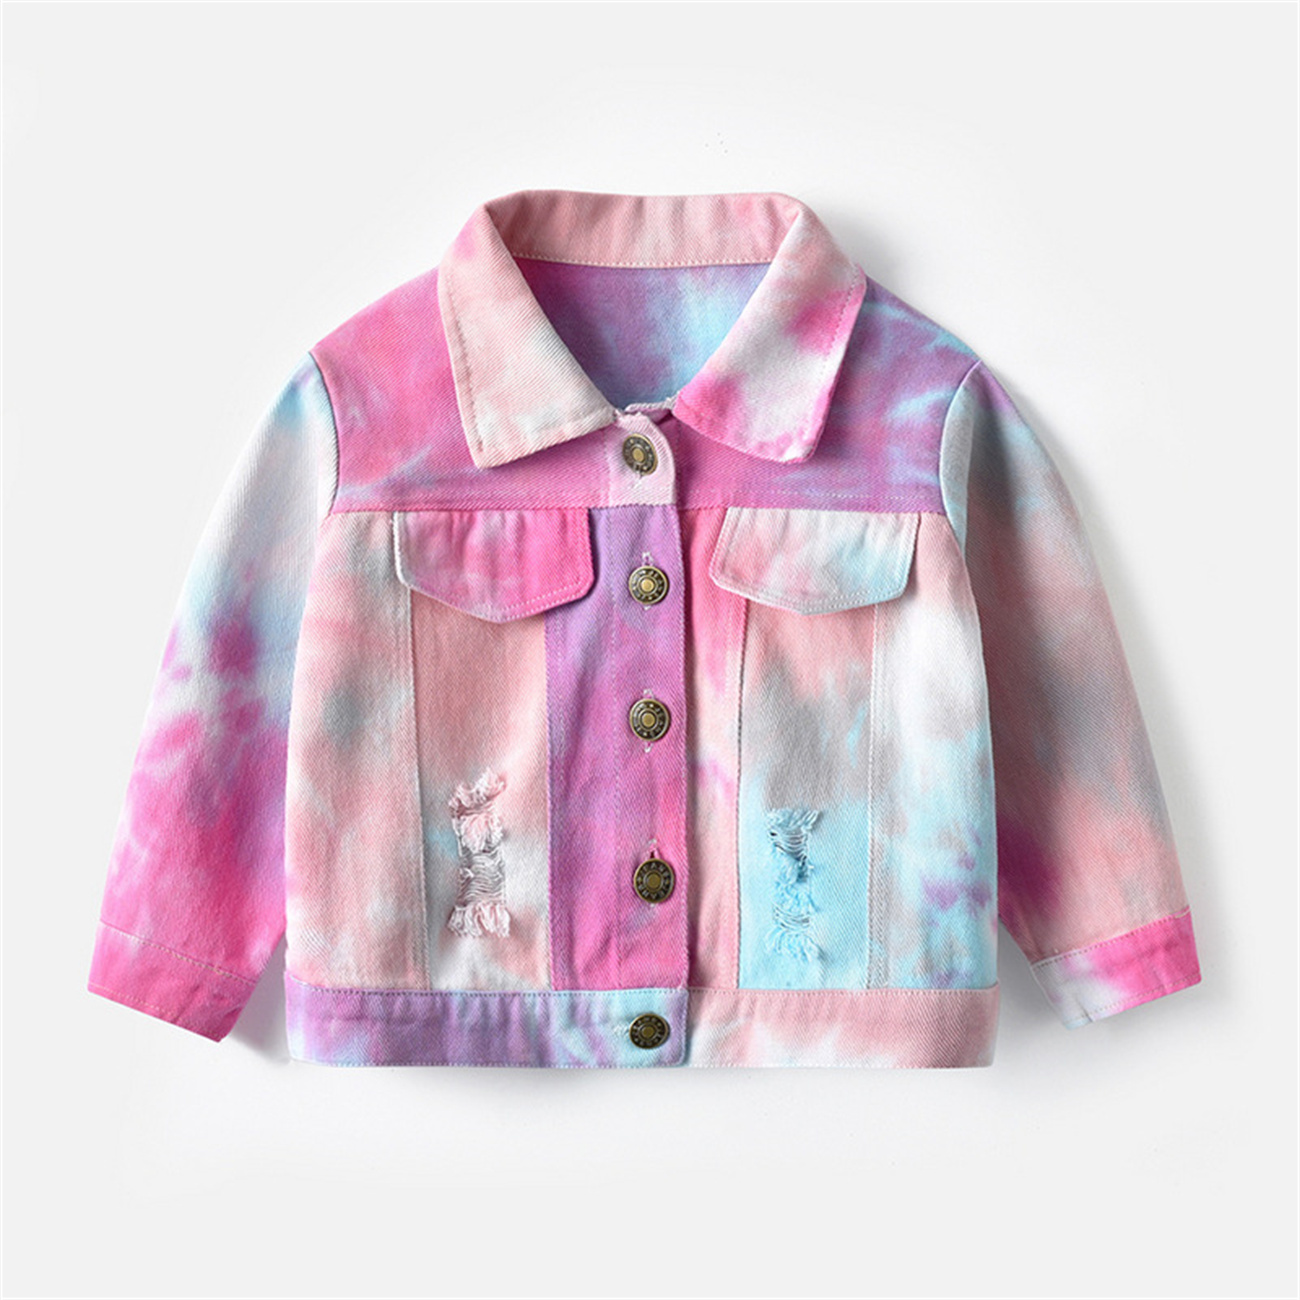 Toddler Tie-dye Denim Jean Jacket for Girls Boys Size 1-7T Single-breasted Mid-length Jacket for Spring Fall,Pink,3-4 Years - image 1 of 7